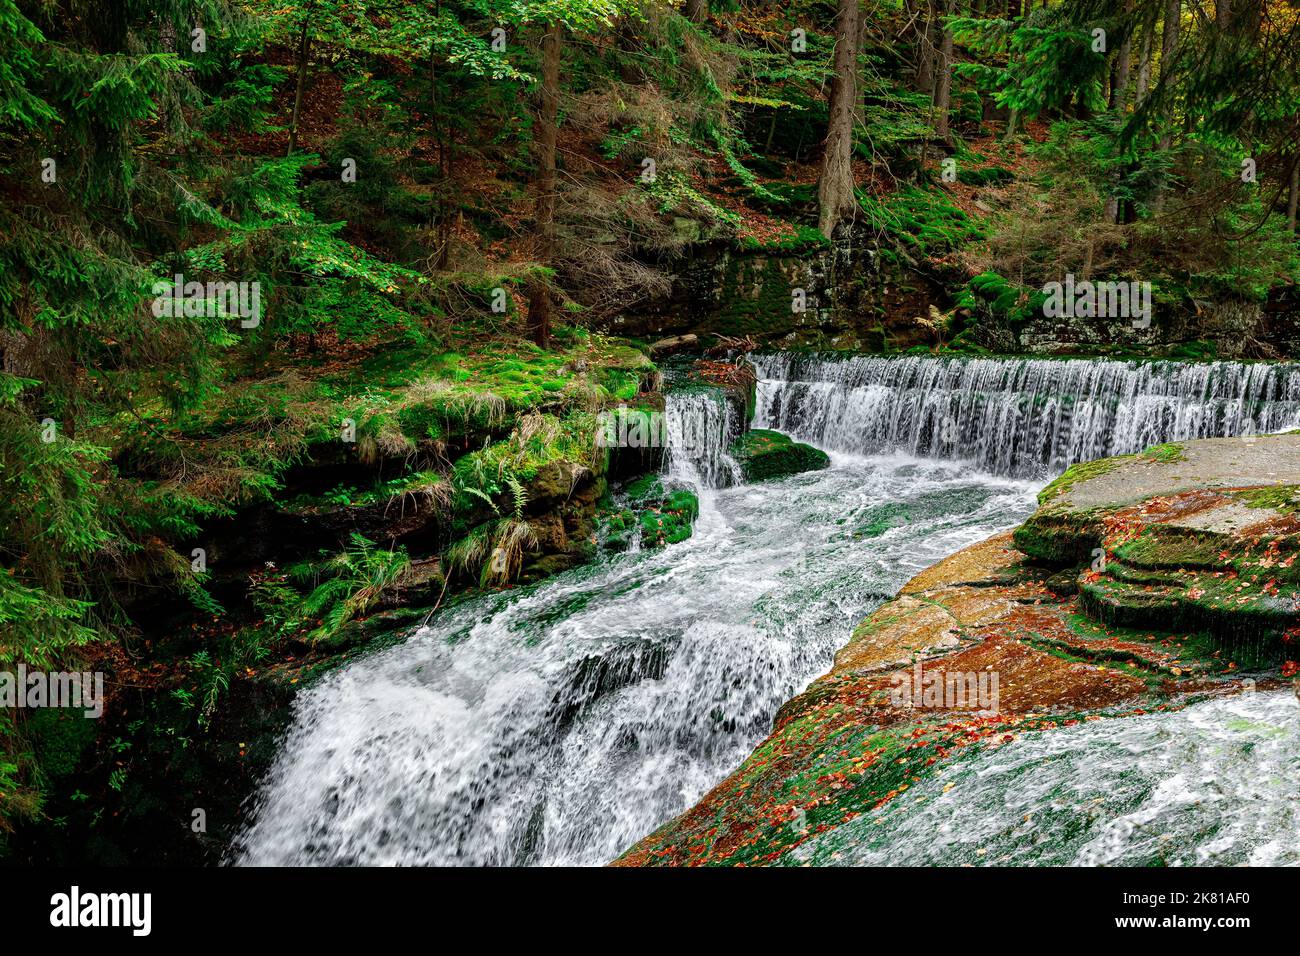 Nature landscape. Waterfall. Beautiful fall mountain wild Forest waterfall with green moss cover stones. Forest autumn landscape. Scenery of nature Stock Photo